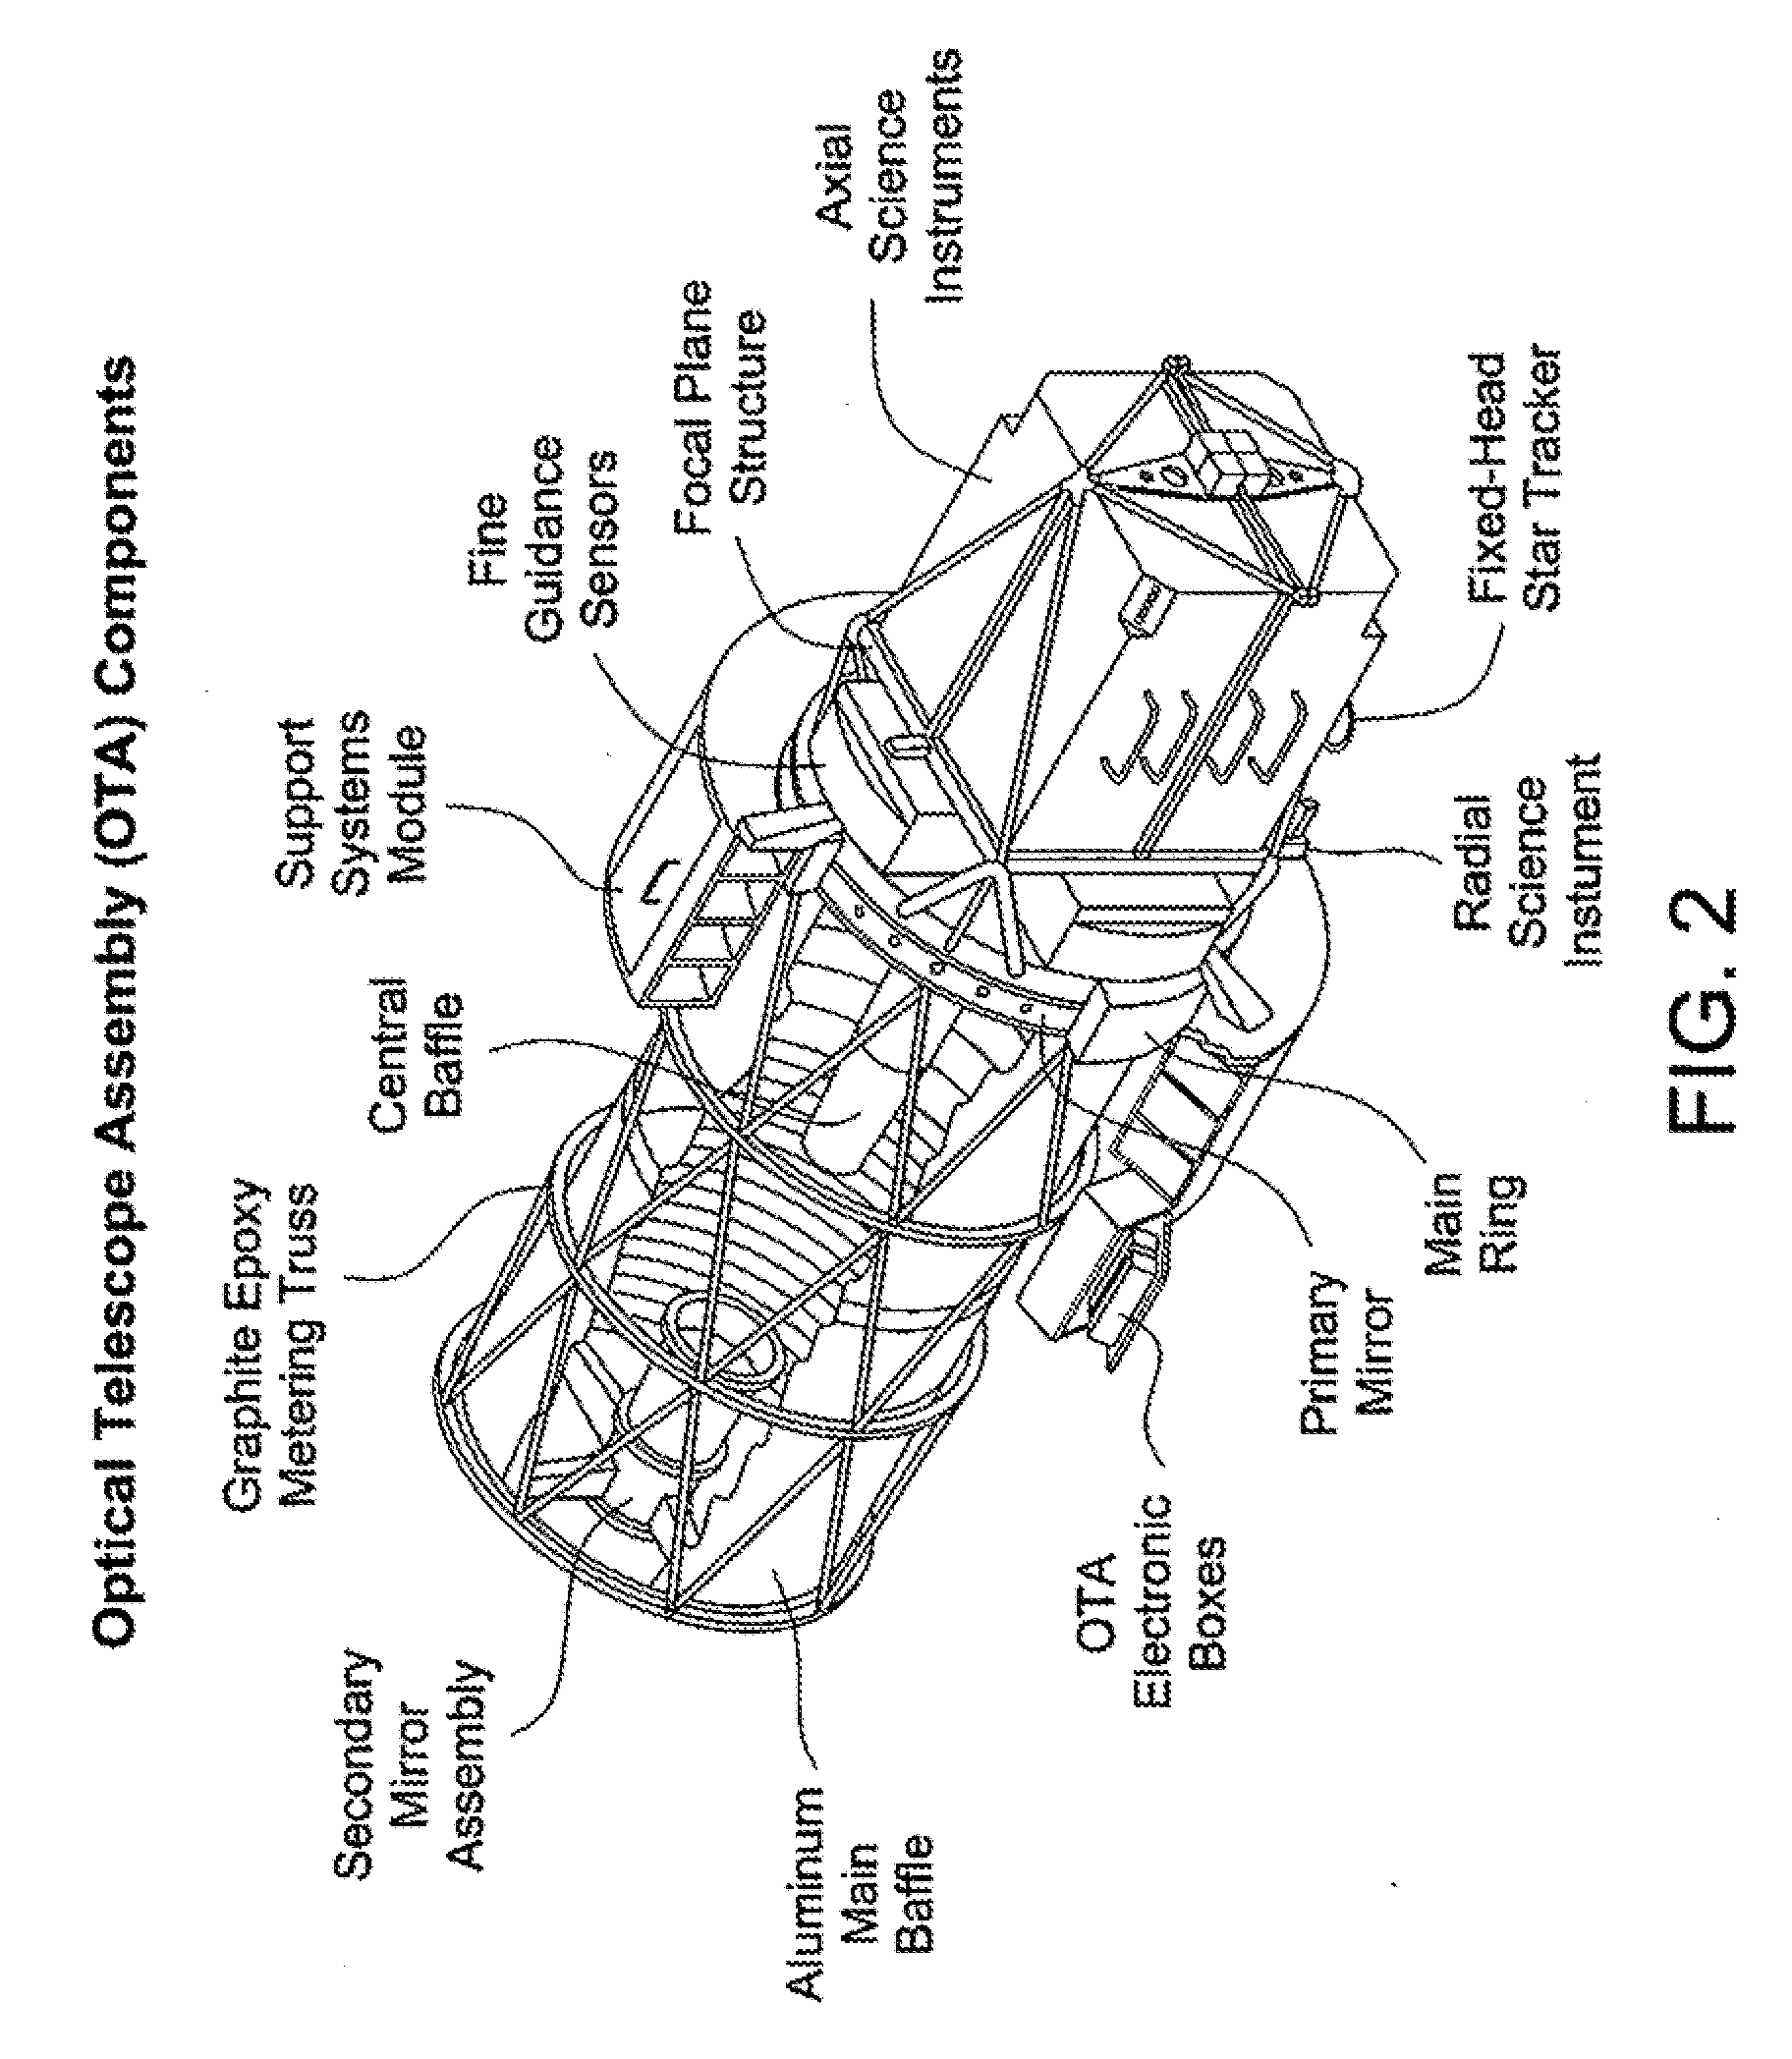 Method and Associated Apparatus for Capturing, Servicing and De-Orbiting Earth Satellites Using Robotics